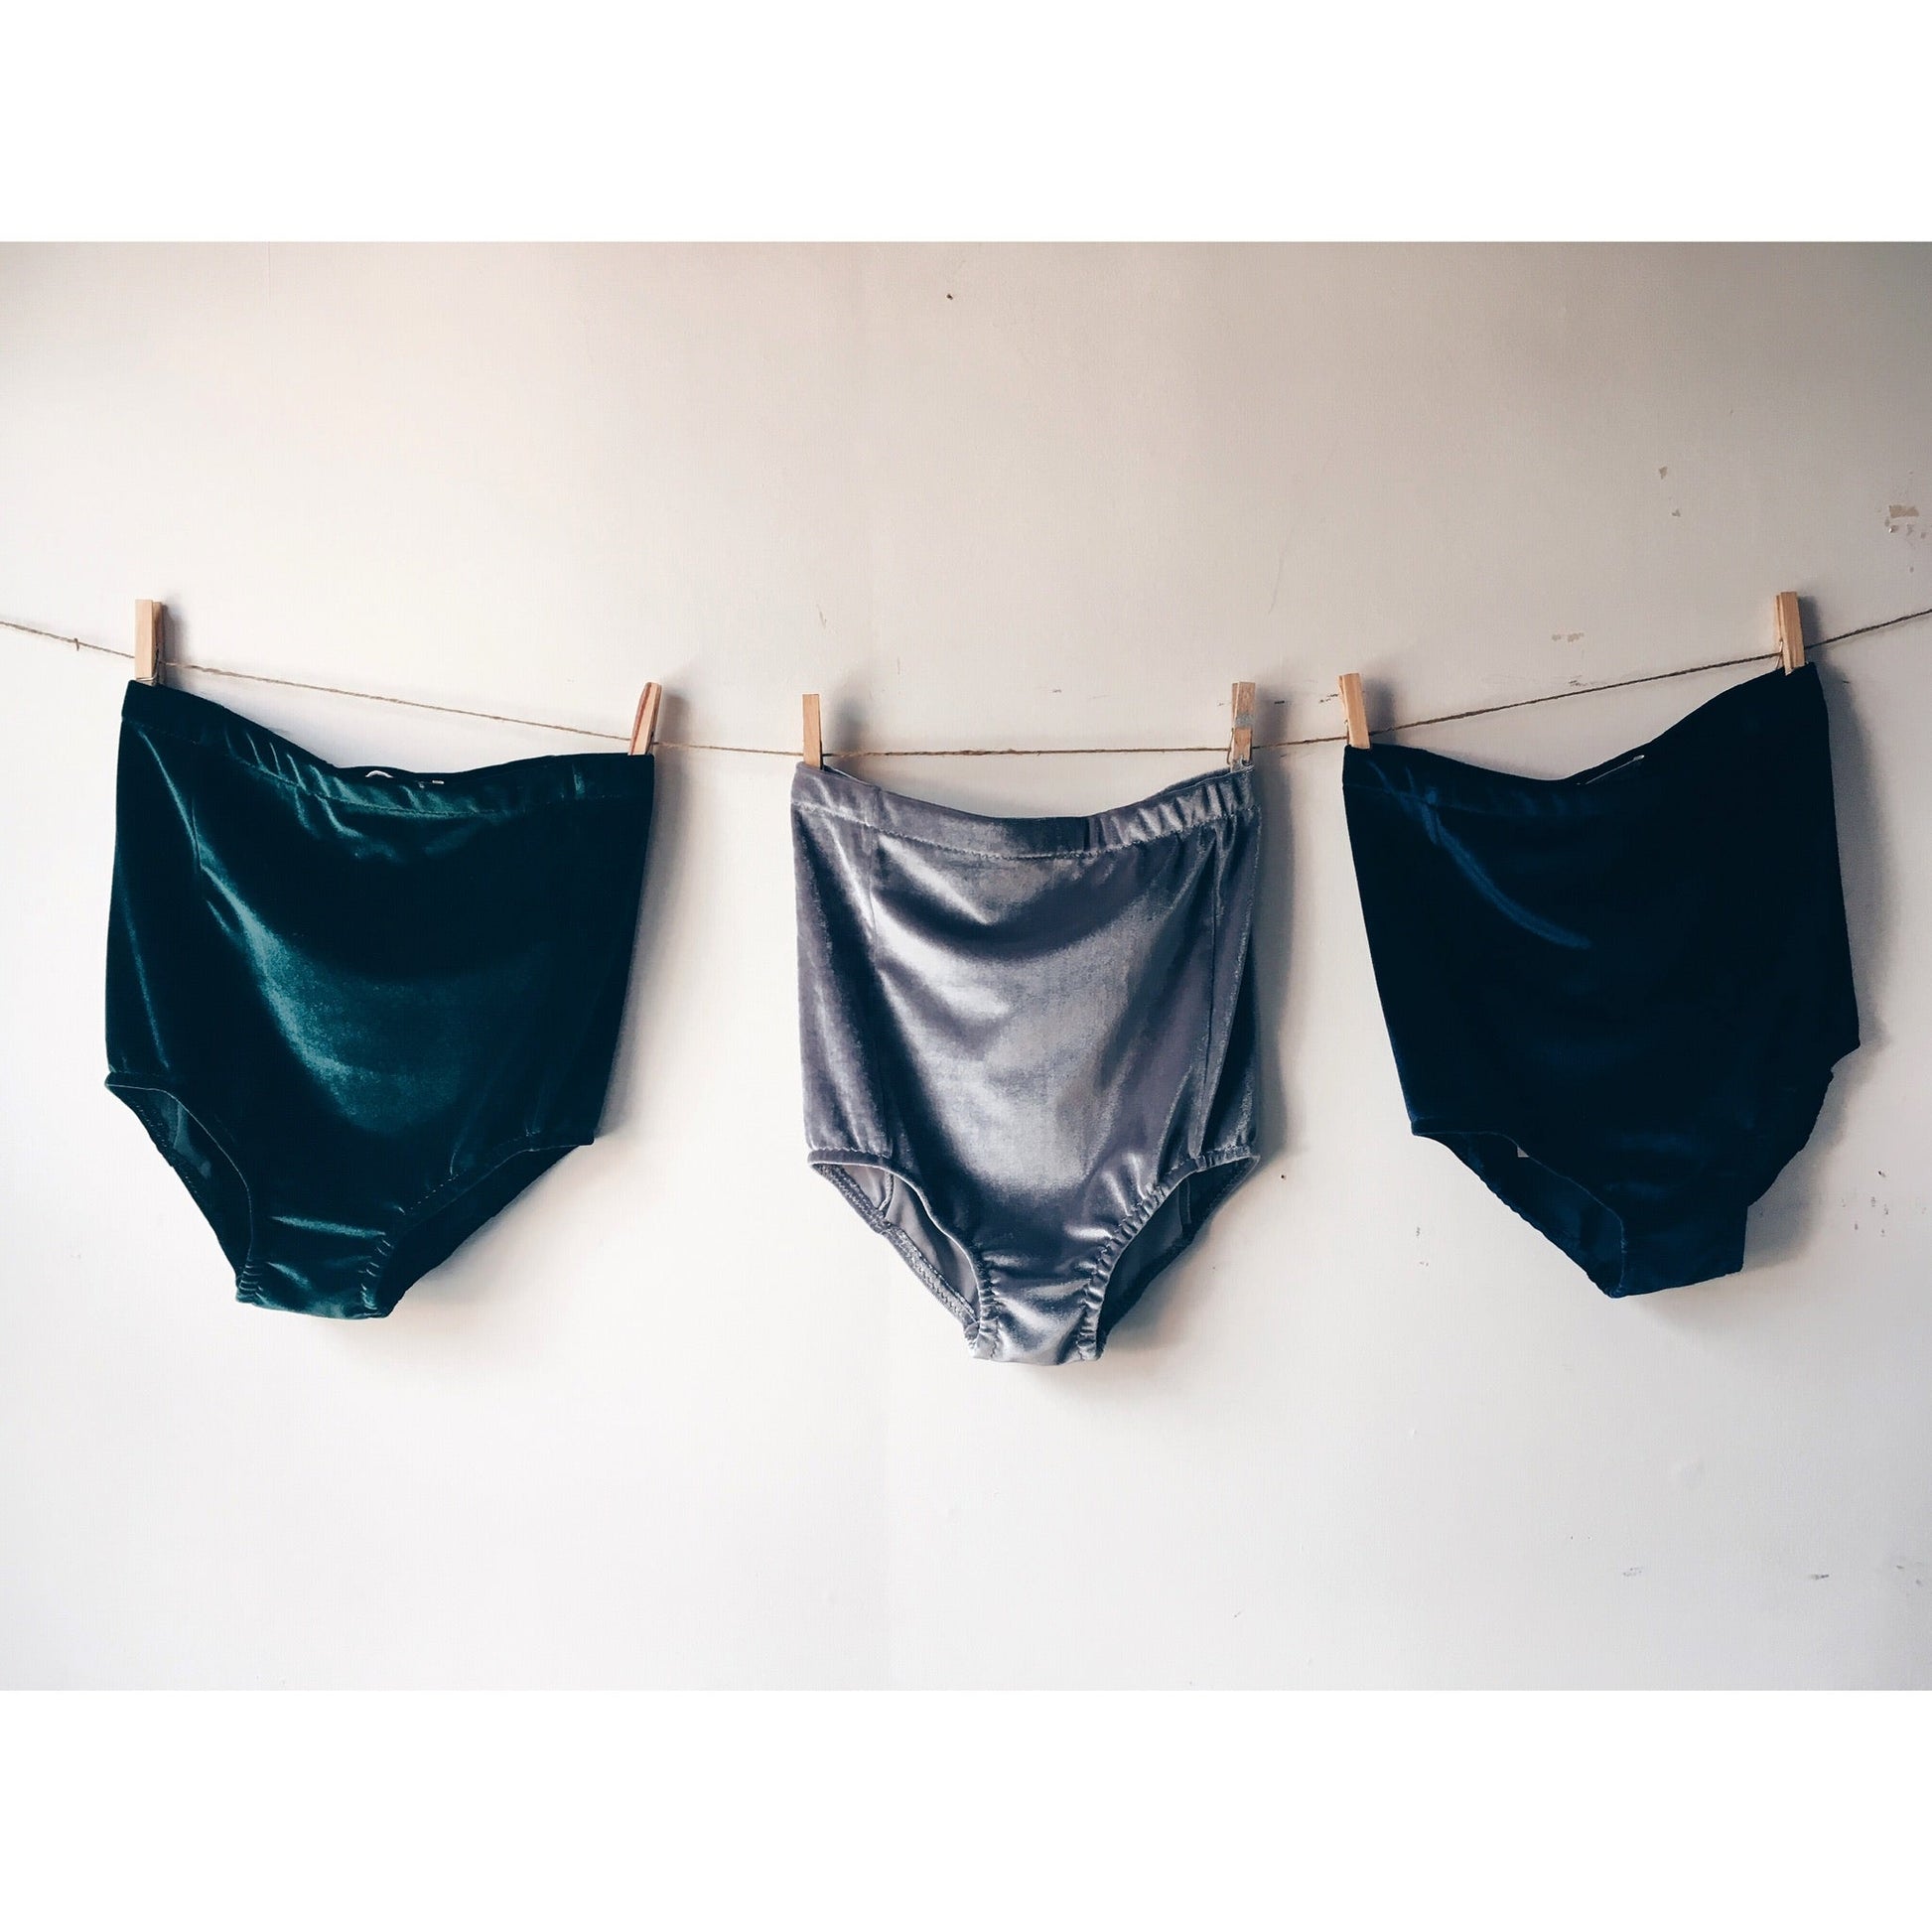 3 pairs of Velvet shorts pegged to a line against a white wall